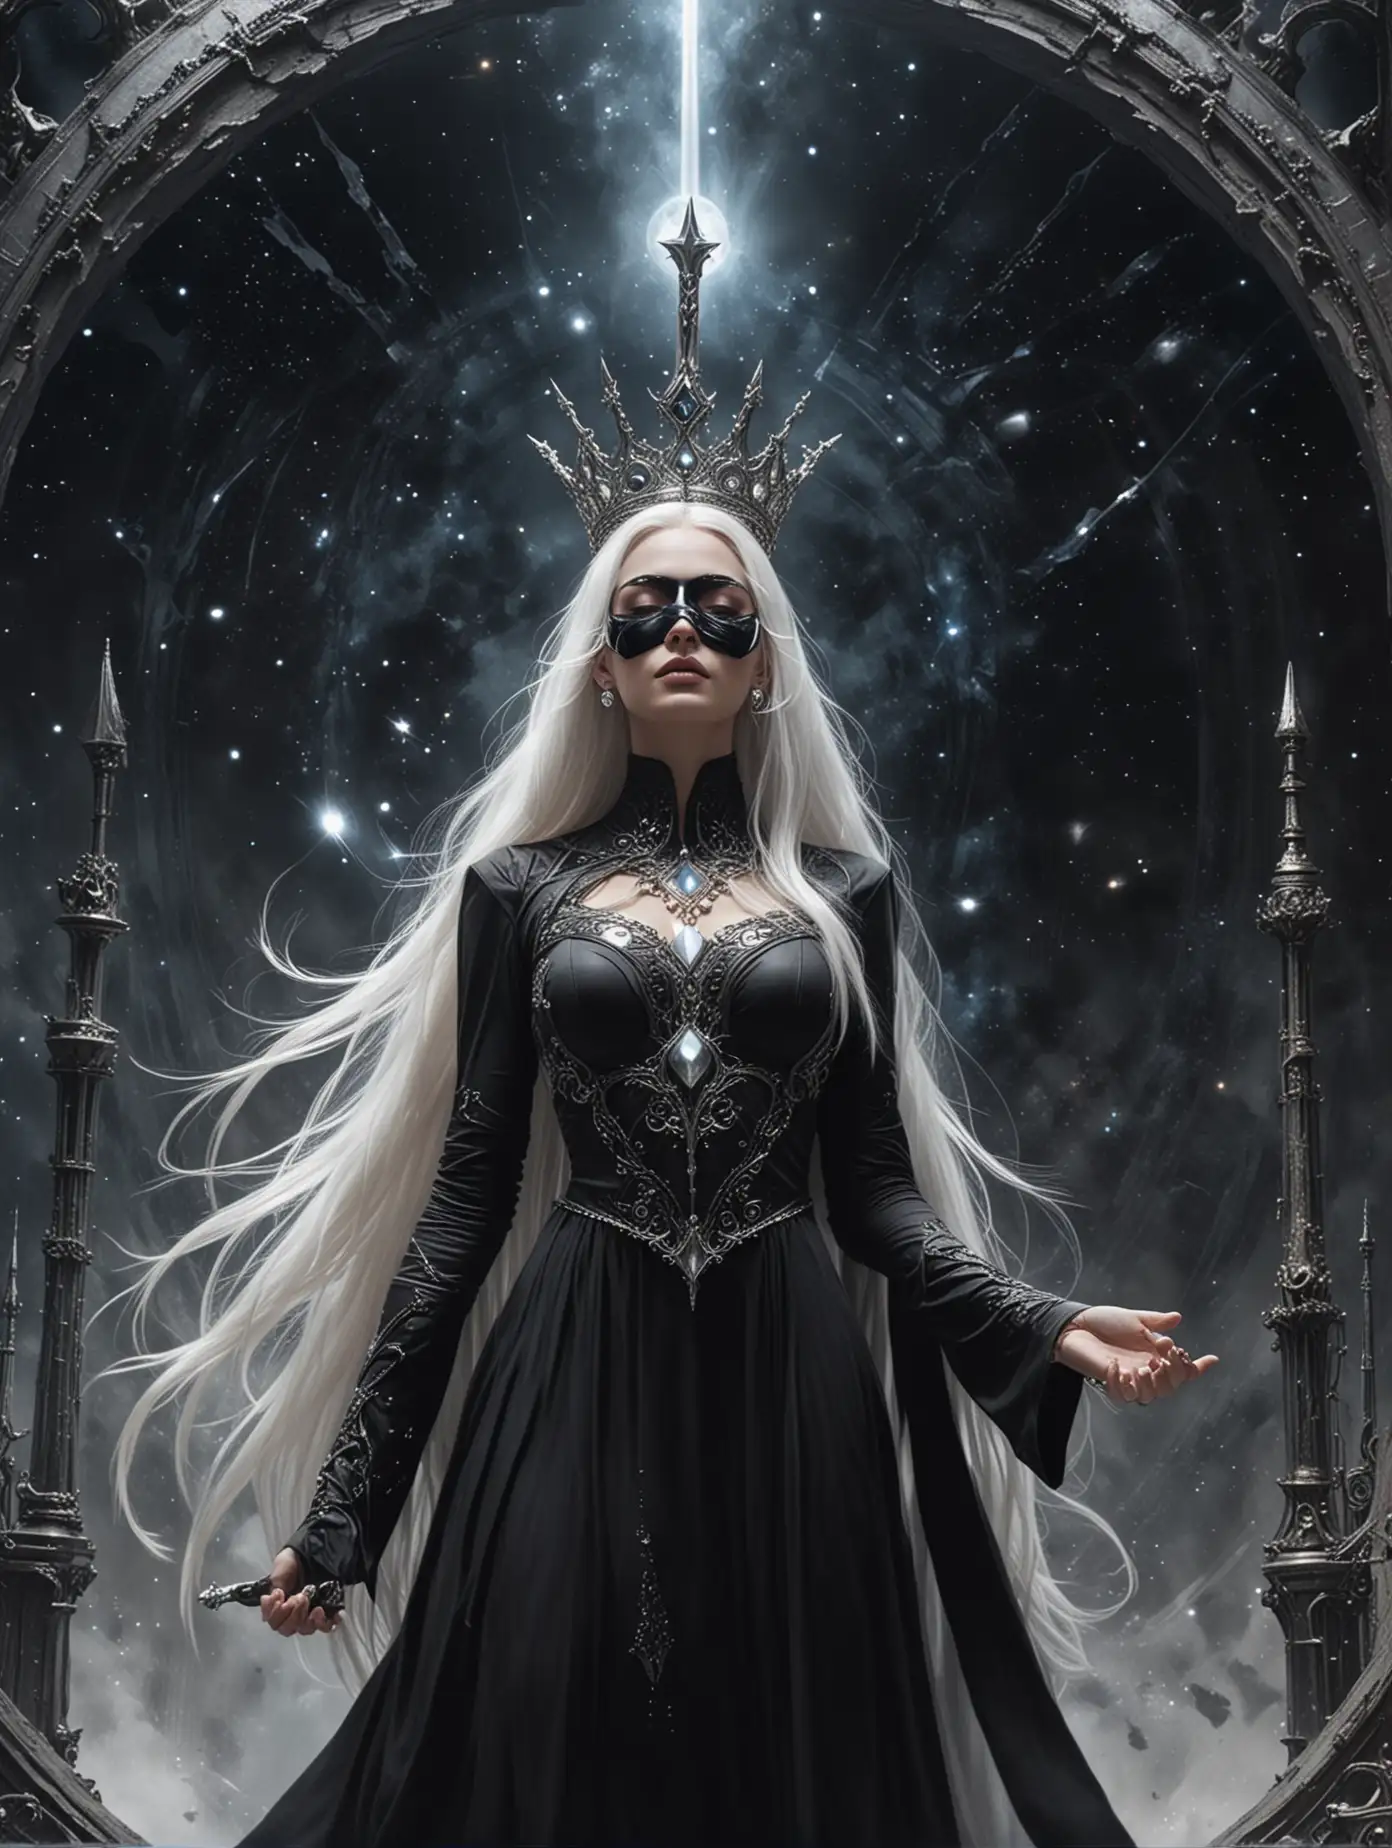 Oracle-Woman-Confronts-Black-Hole-in-Space-with-Iron-Sword-and-Crystal-Ball